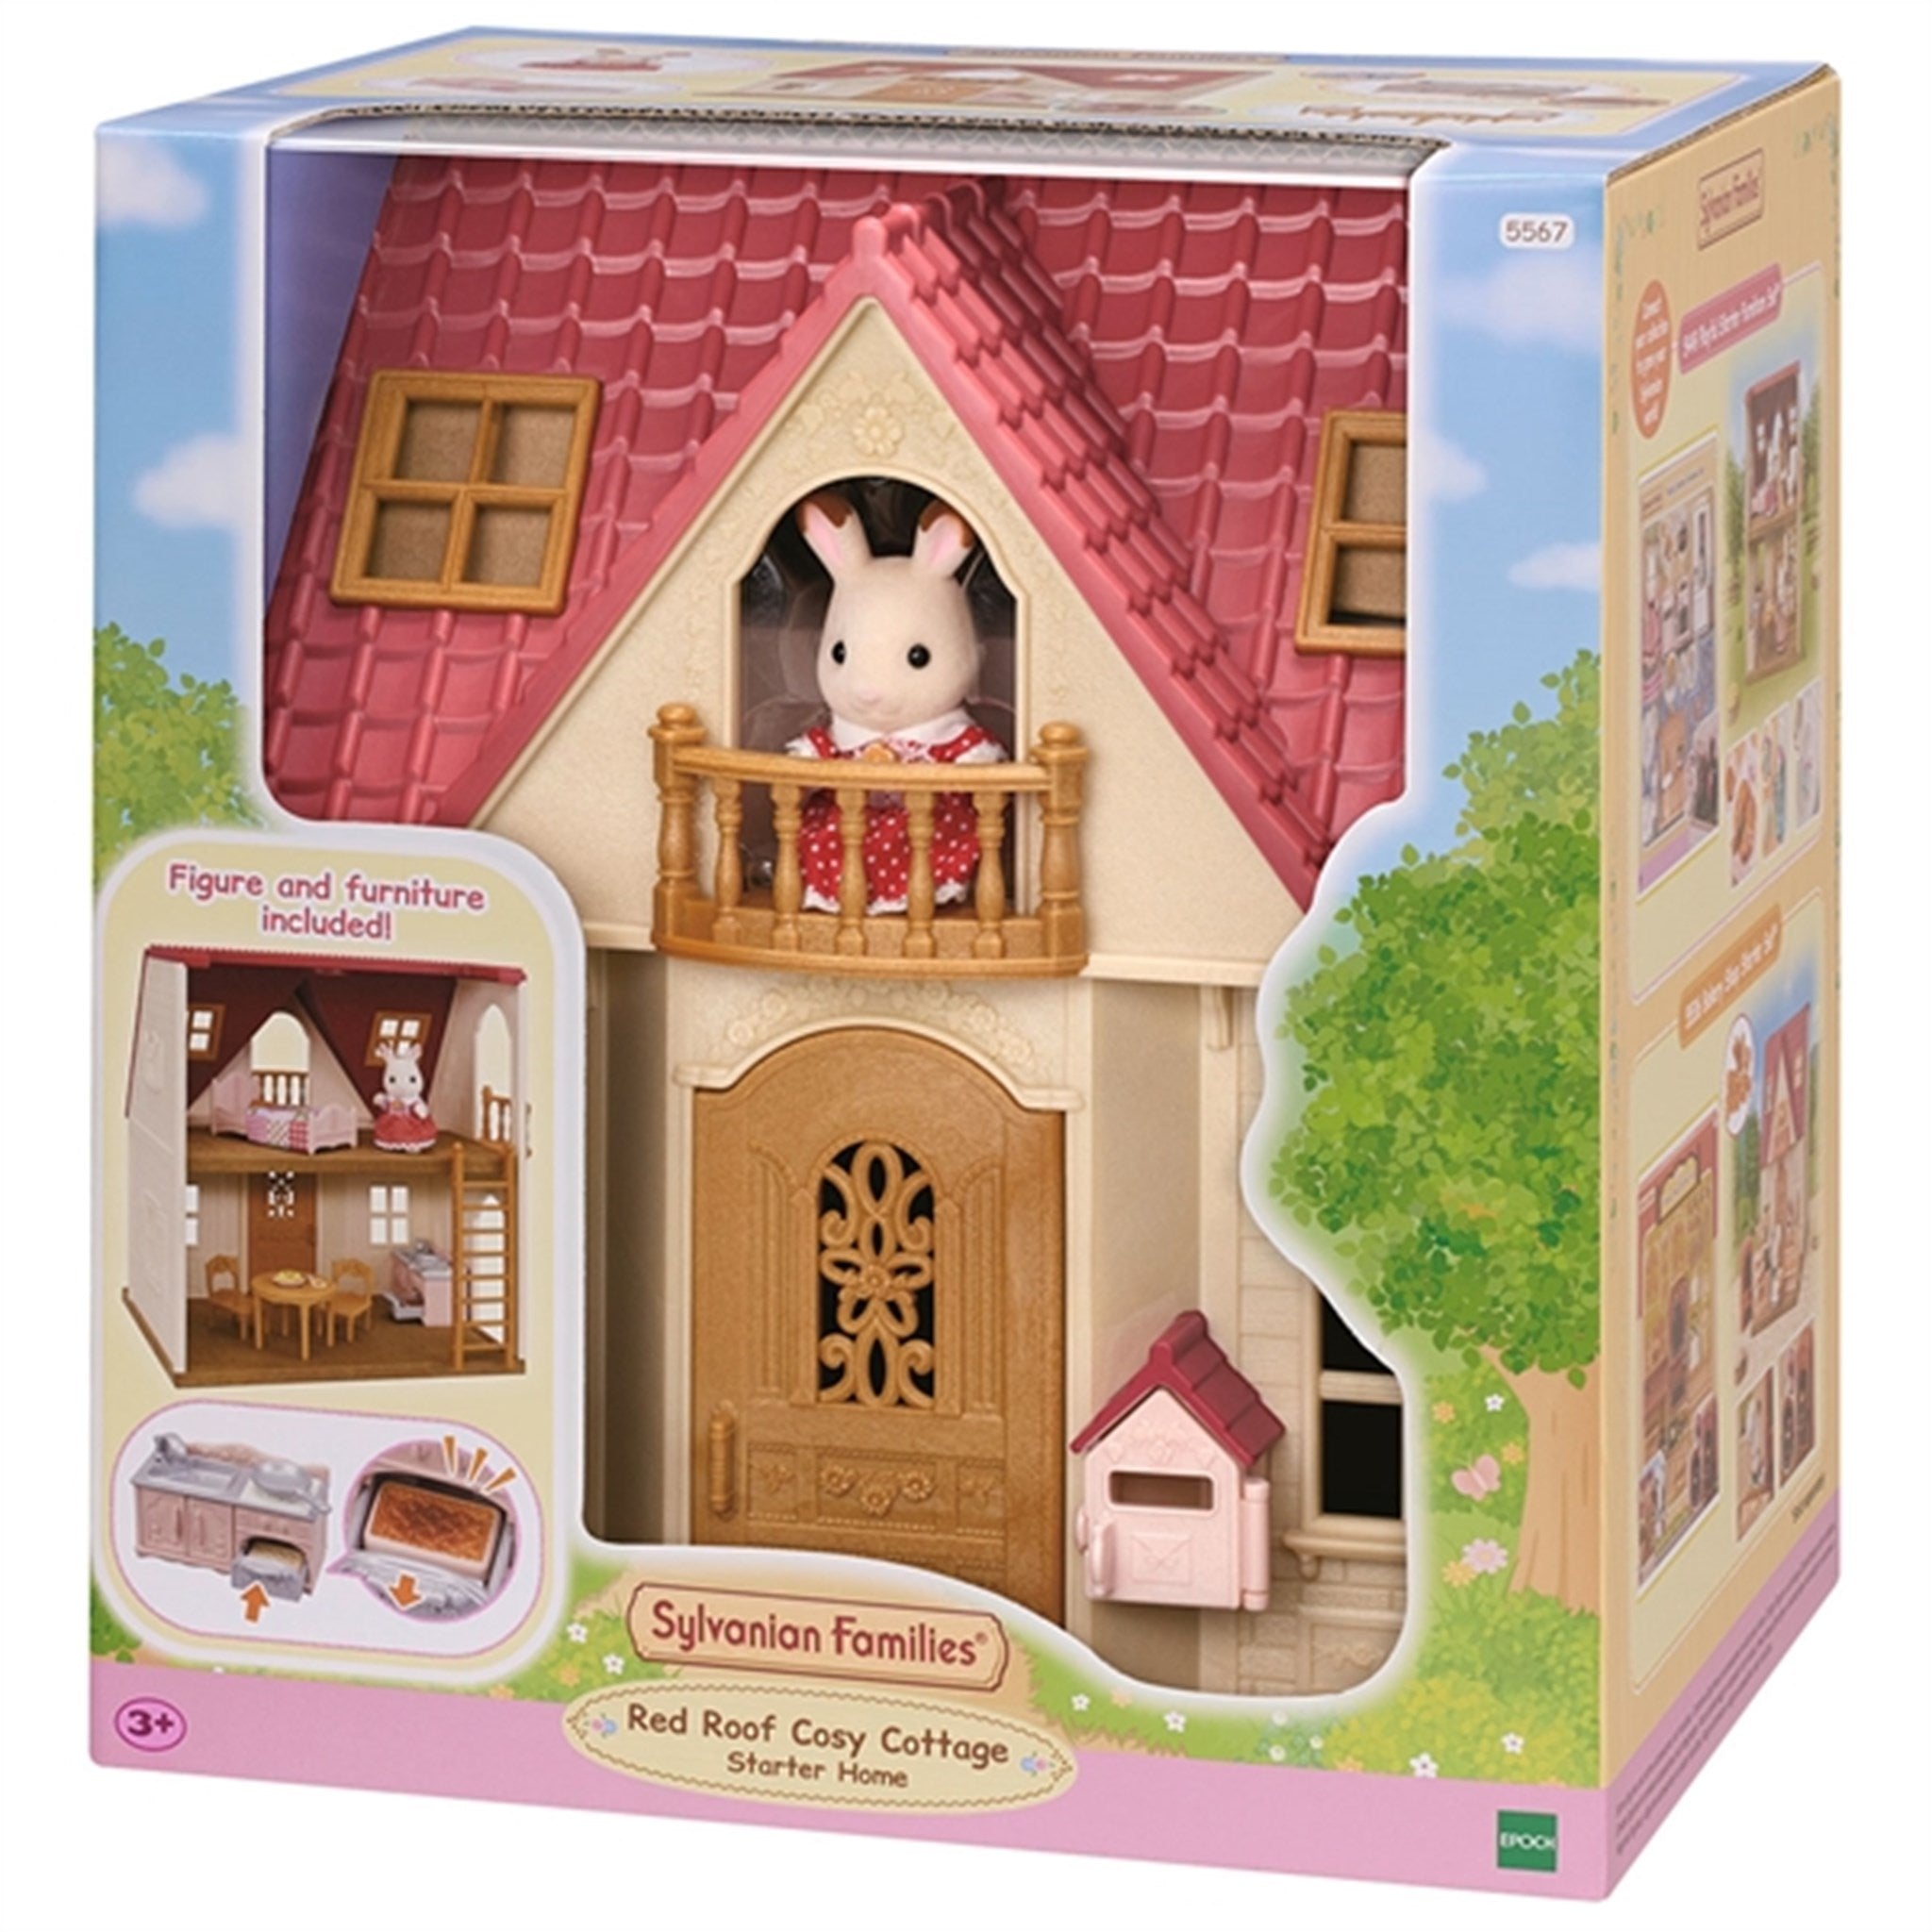 Sylvanian Families® Red Roof Cosy Cottage